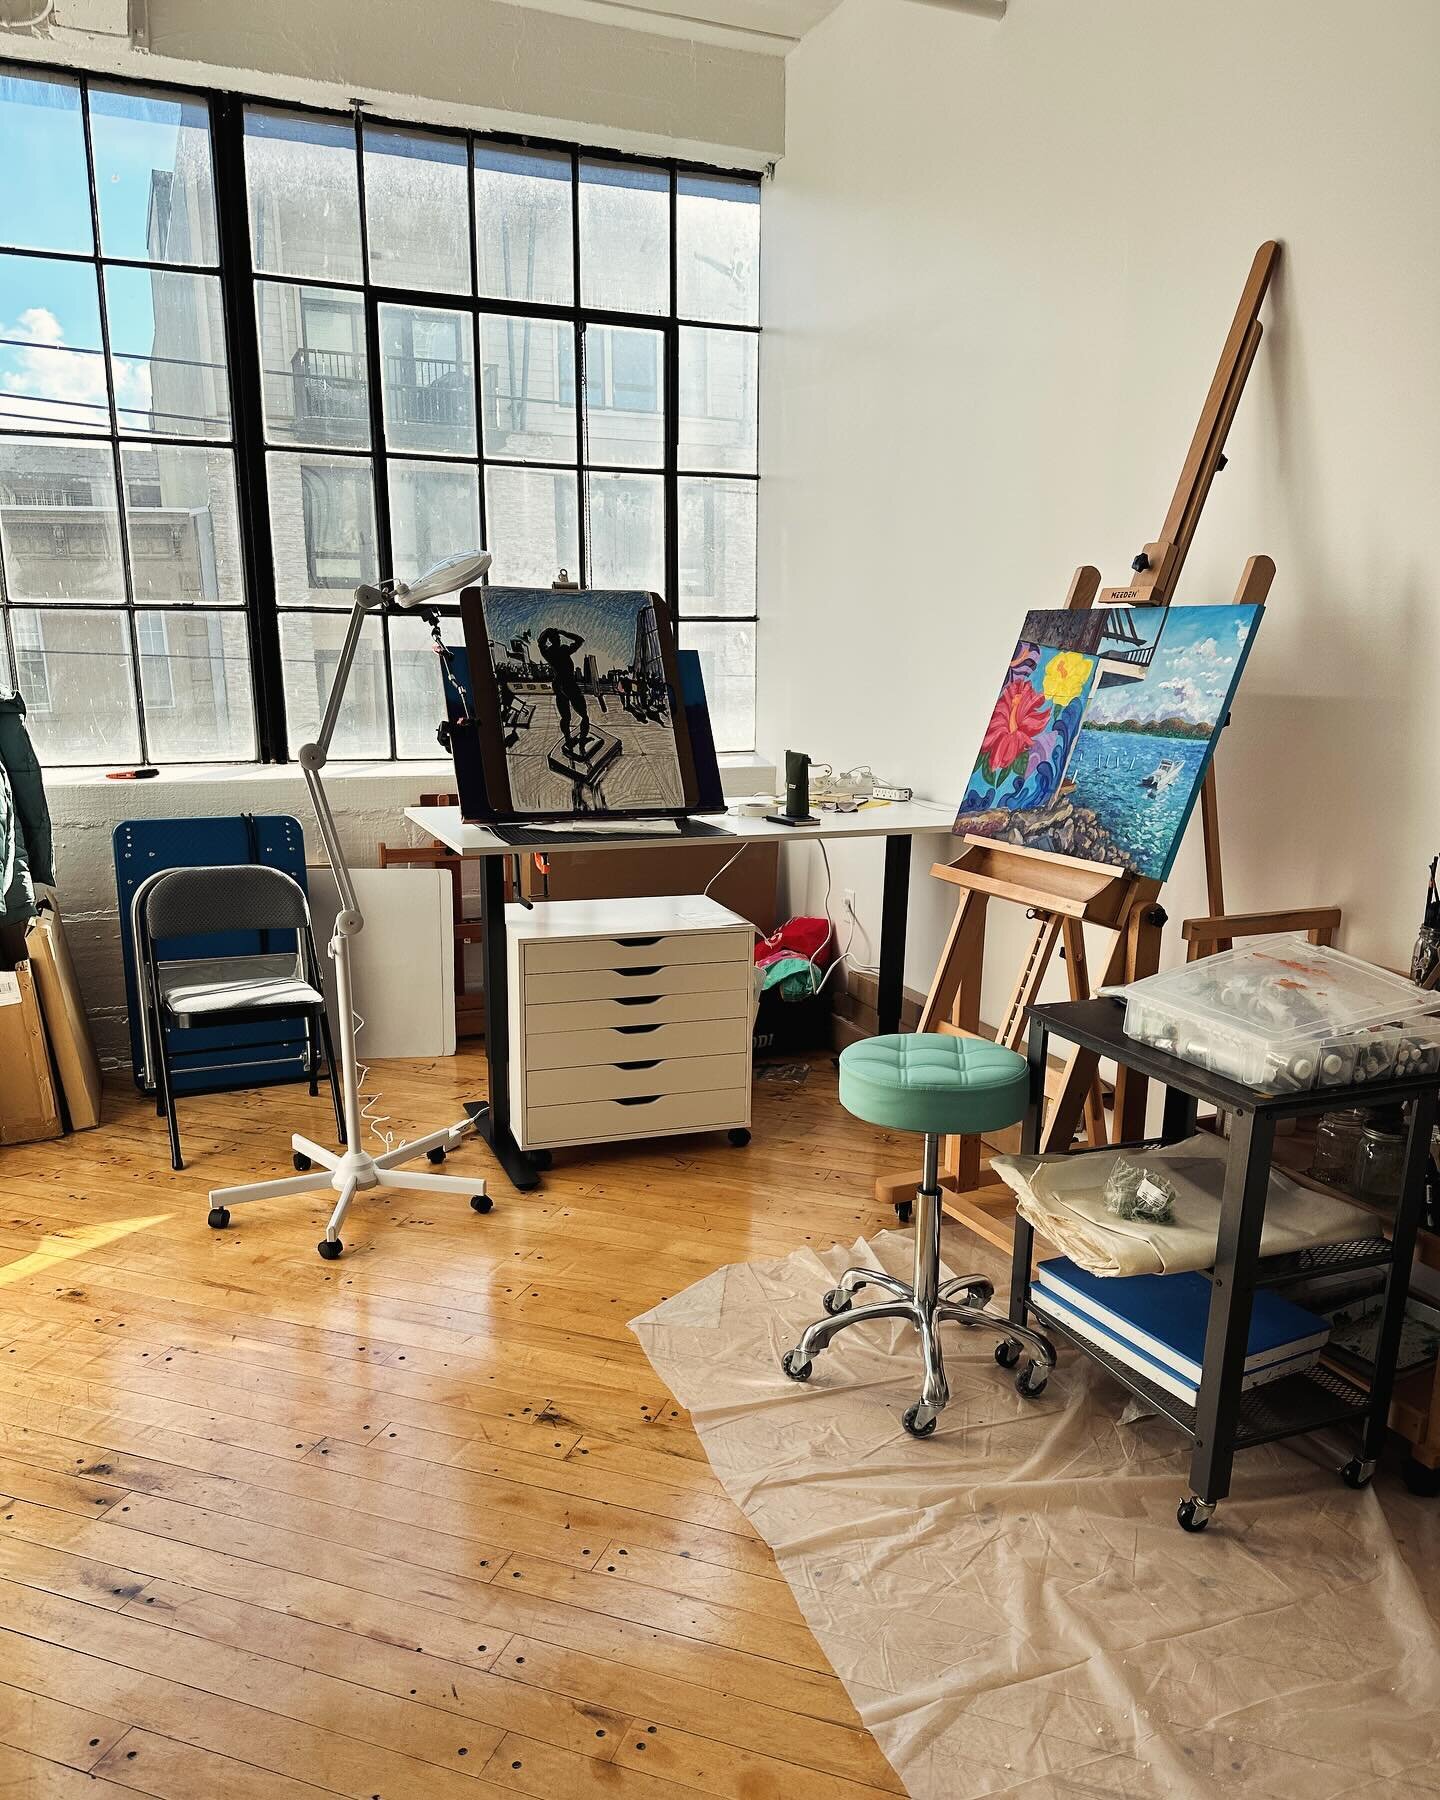 Feeling grateful. 💙🩵💚
Studio/Gallery at the Monroe Center is officially open. I truly can&rsquo;t wait to see your faces! DM me for details.

#studio #gallery #hobokennj #hobokenartist #monroecenter #openstudio #affordableart #artcollectors